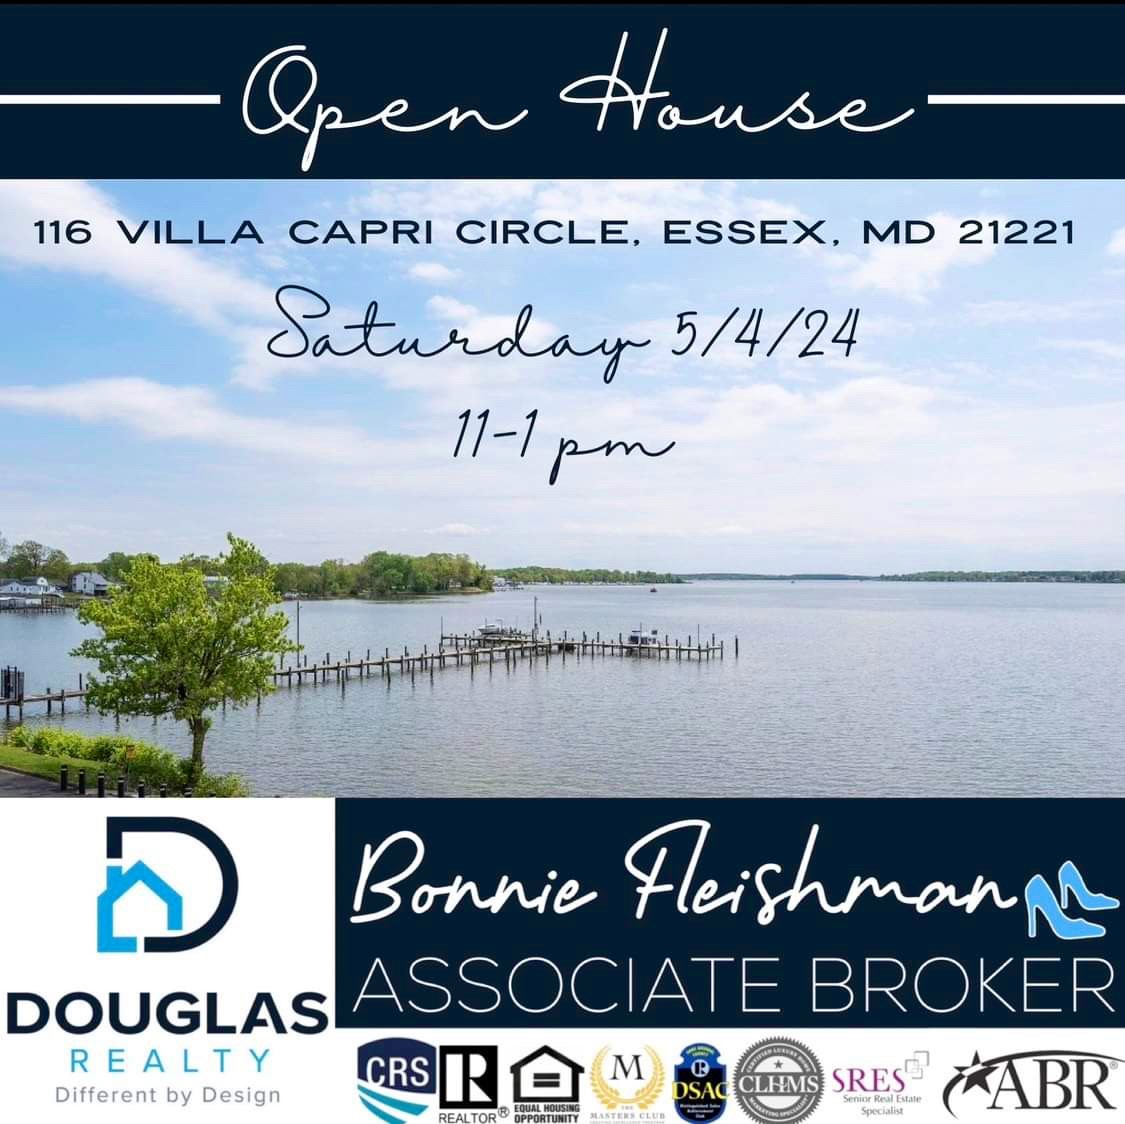 💙OPEN HOUSE
💙SATURDAY 5/4/24 11-1pm
💙116 Villa Capri Circle, Essex, MD 21221
💙For more information on this listing click the link below or, please contact Bonnie Fleishman with Douglas Realty!
bonniefleishman.com/.../116.../MDB…